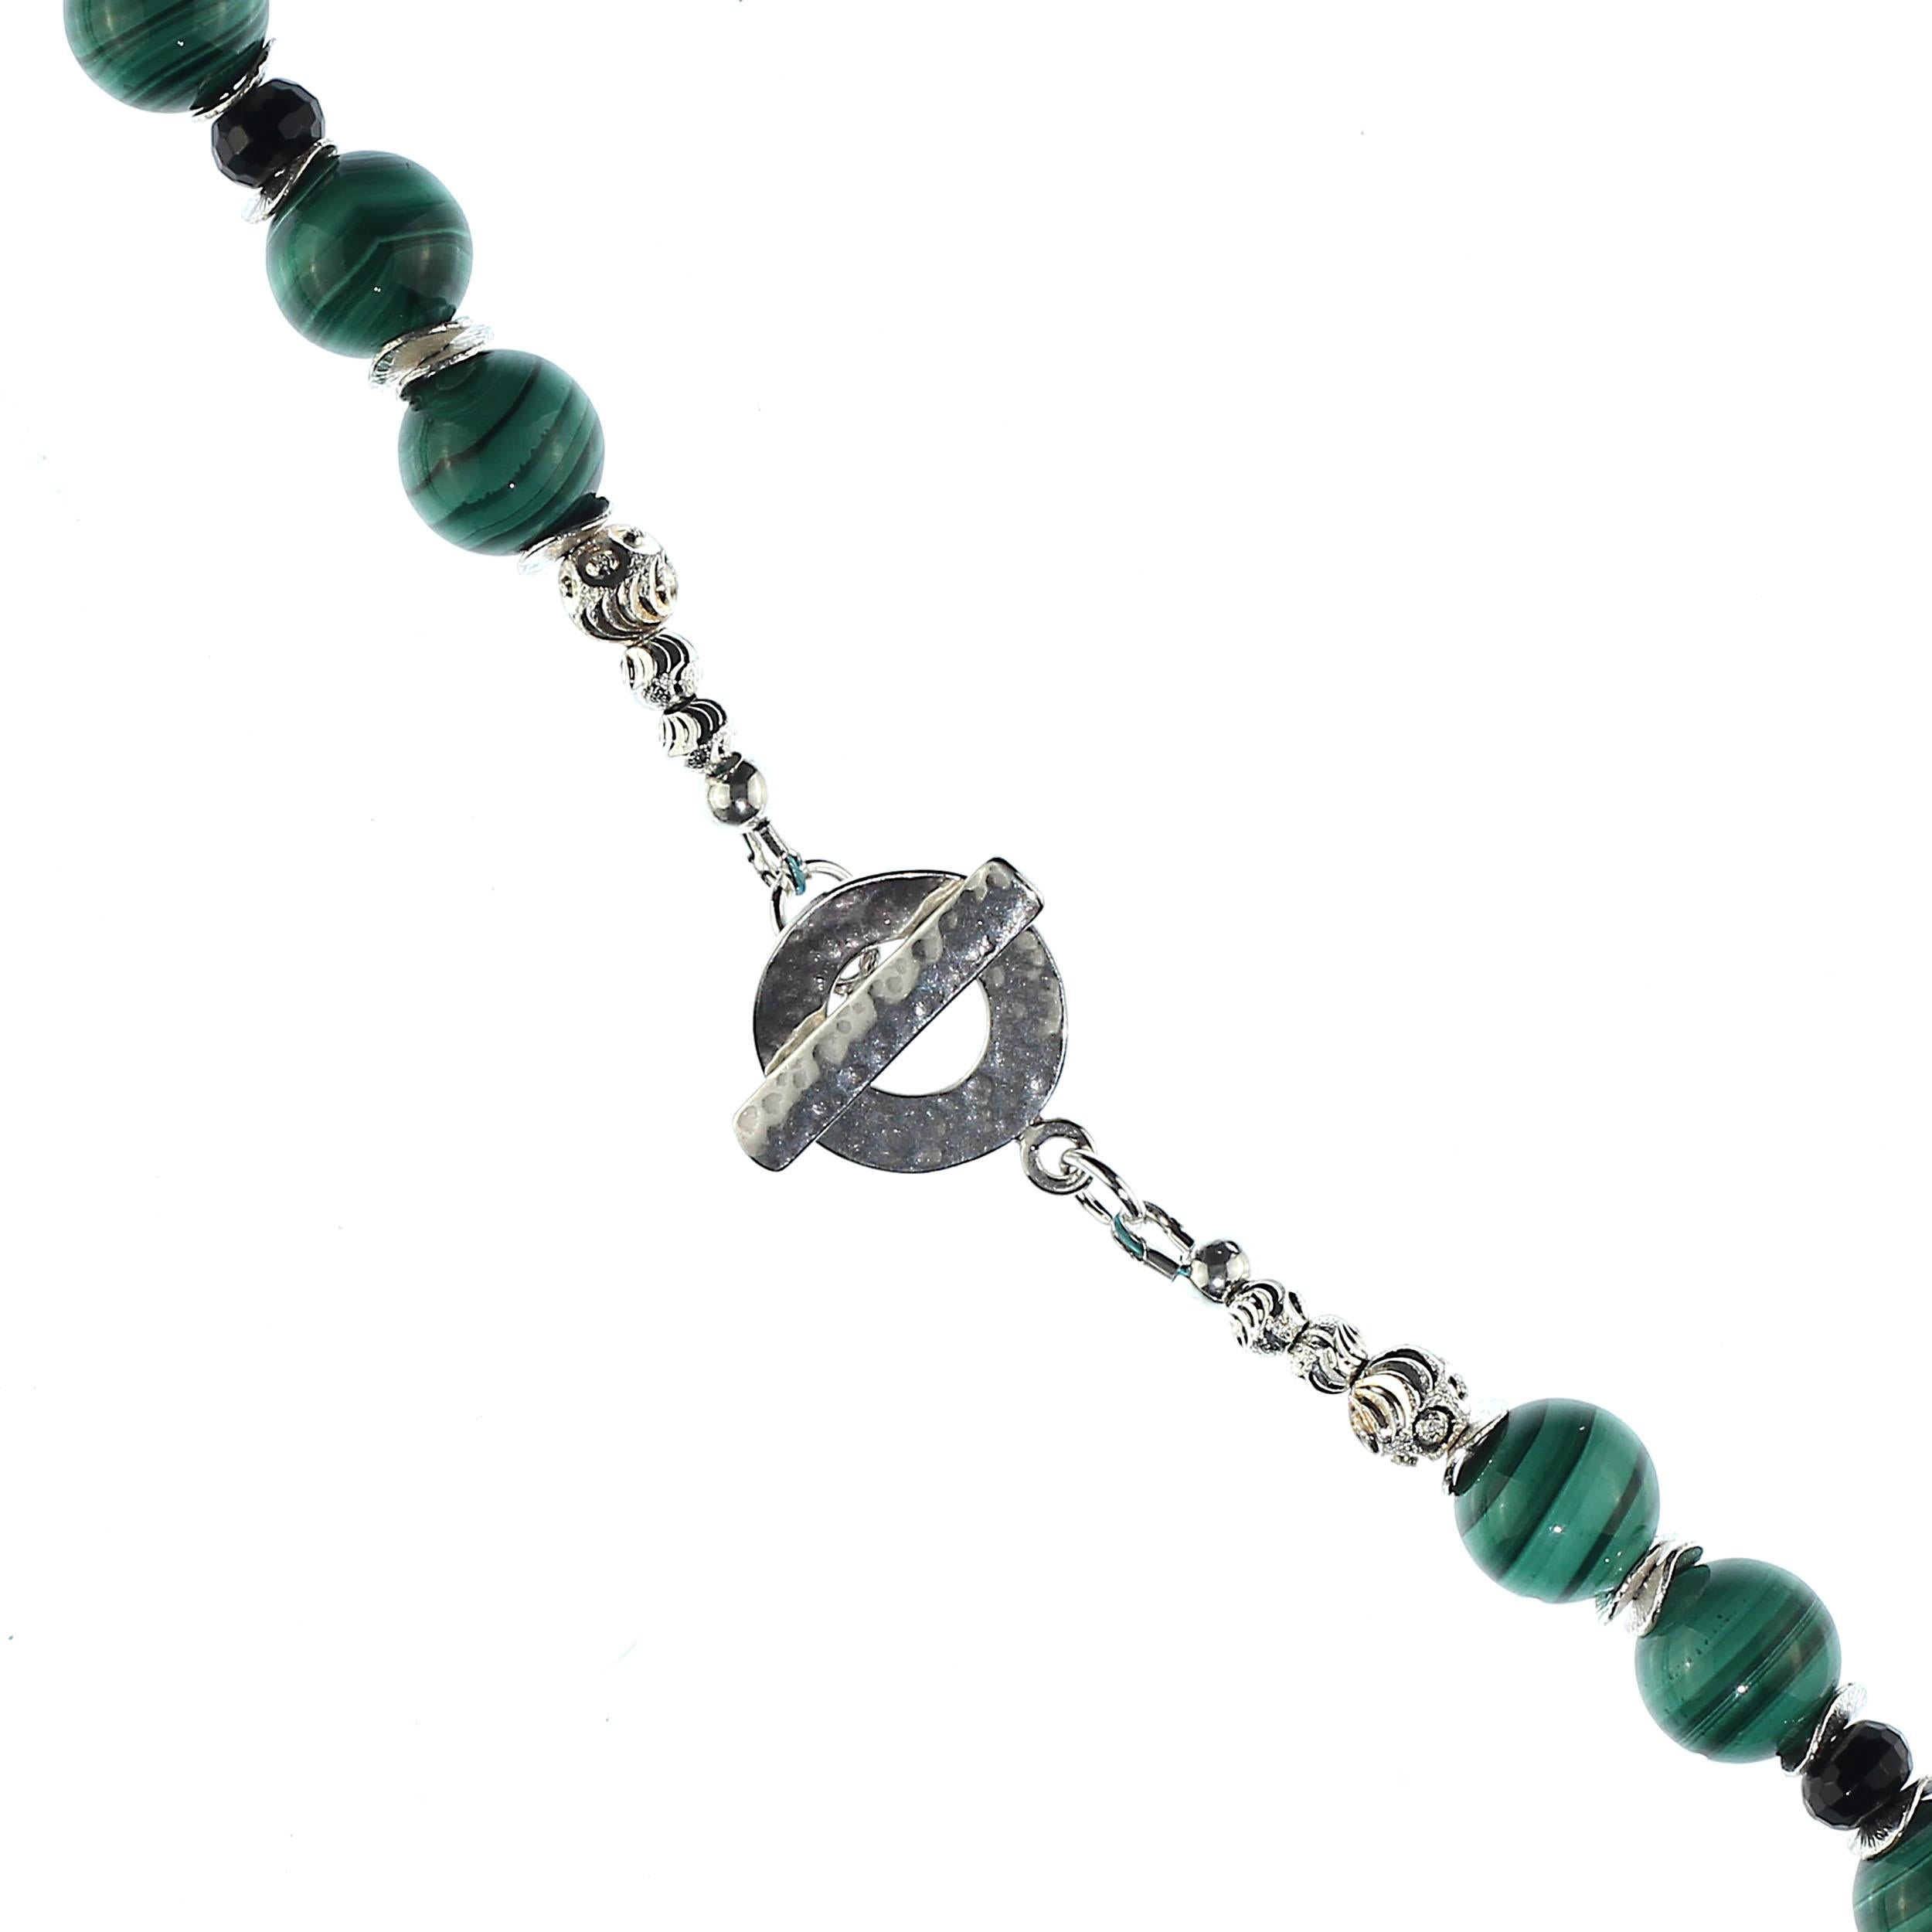 Women's or Men's Malachite and Black Onyx necklace with Silver Accents